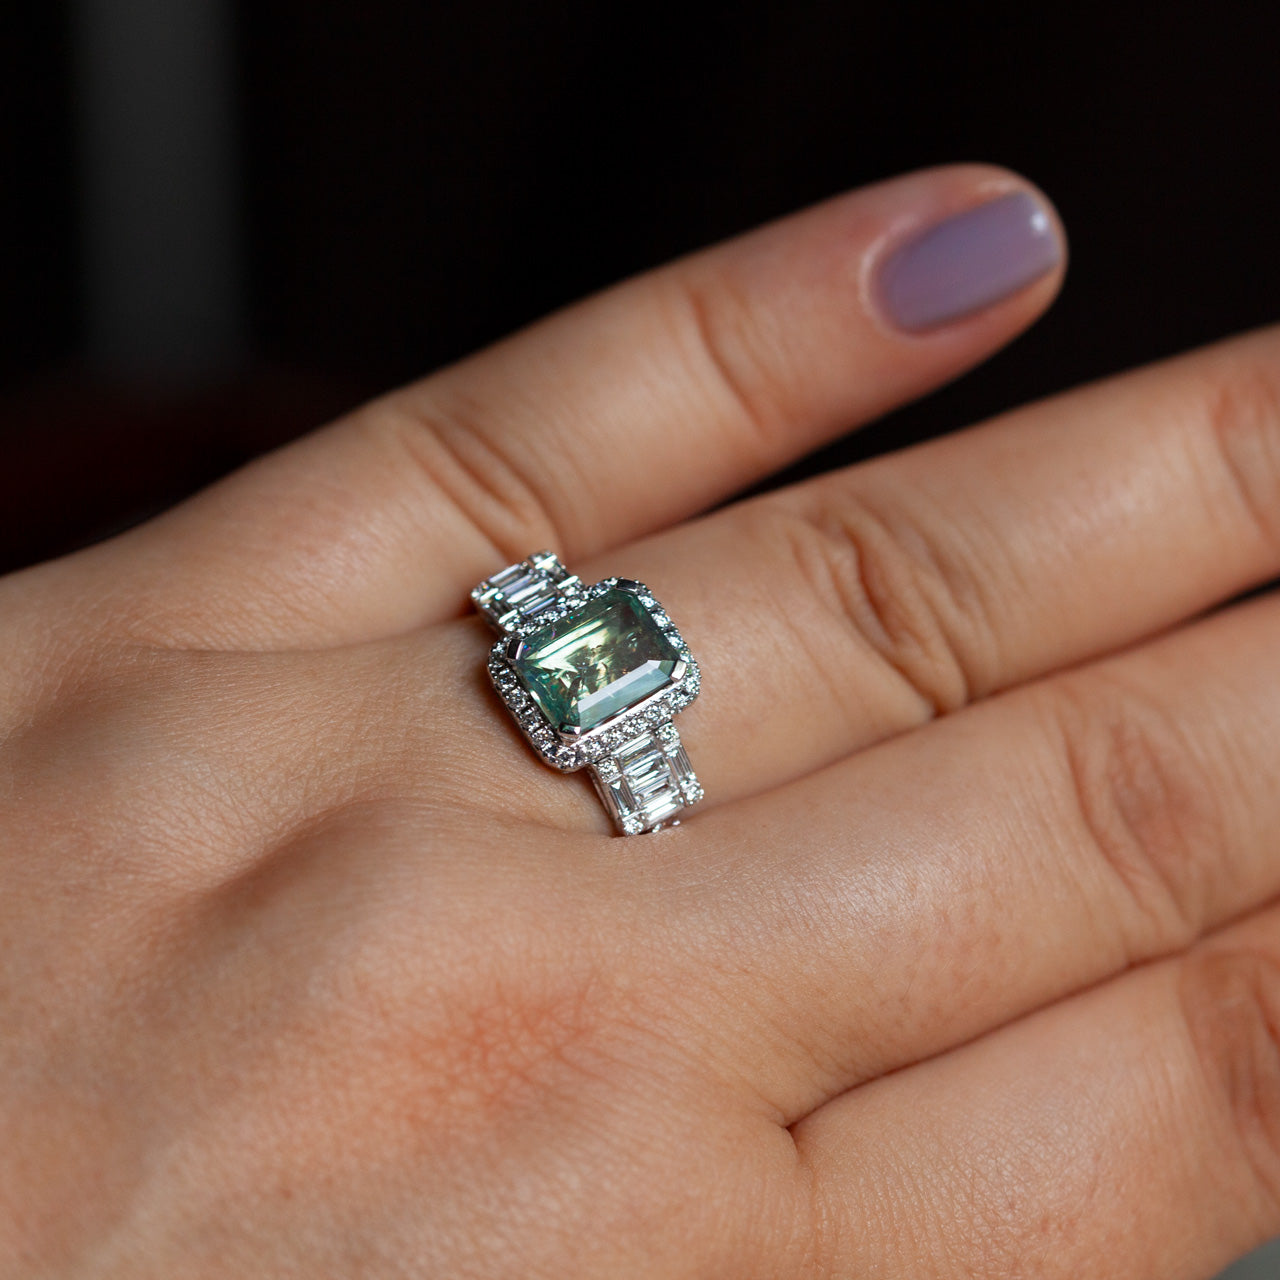 A woman's hand presenting a luxurious 18k white gold ring with a color-changing alexandrite stone